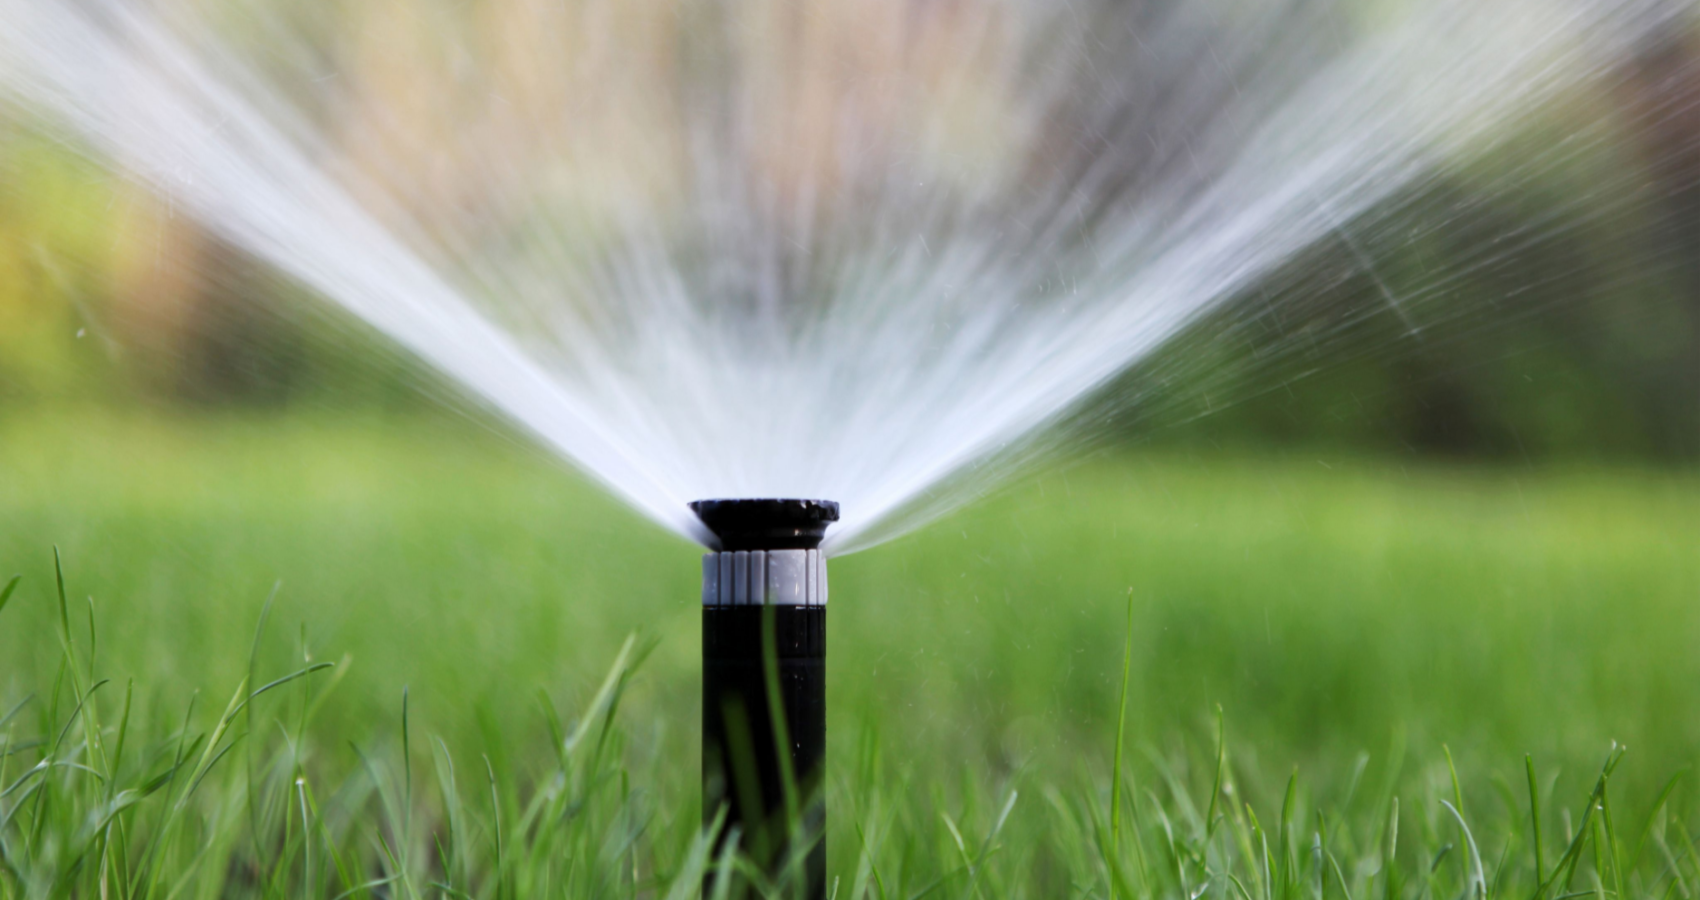 Sprinkler System Installation Ballwin, MO | Lawn Care for Ballwin, MO Area | Lawn Sprinklers of St. Louis